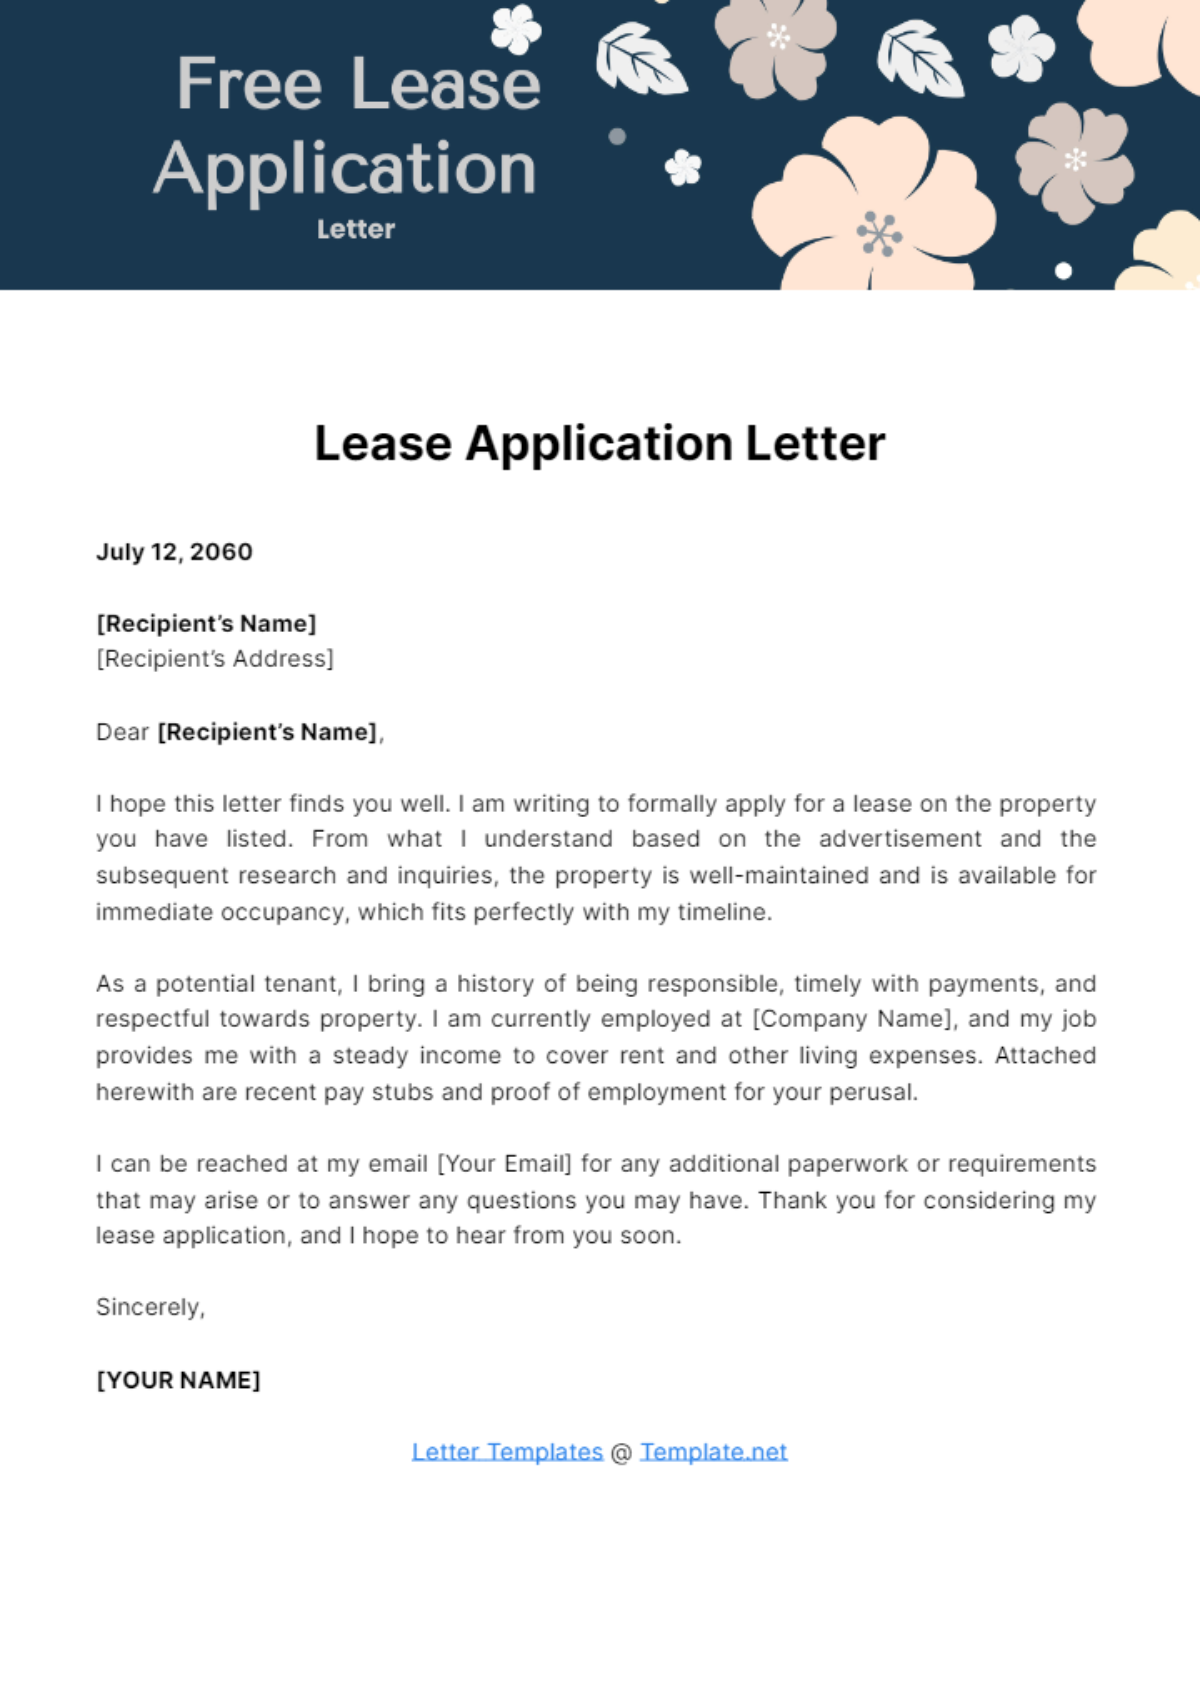 Free Lease Application Letter Template